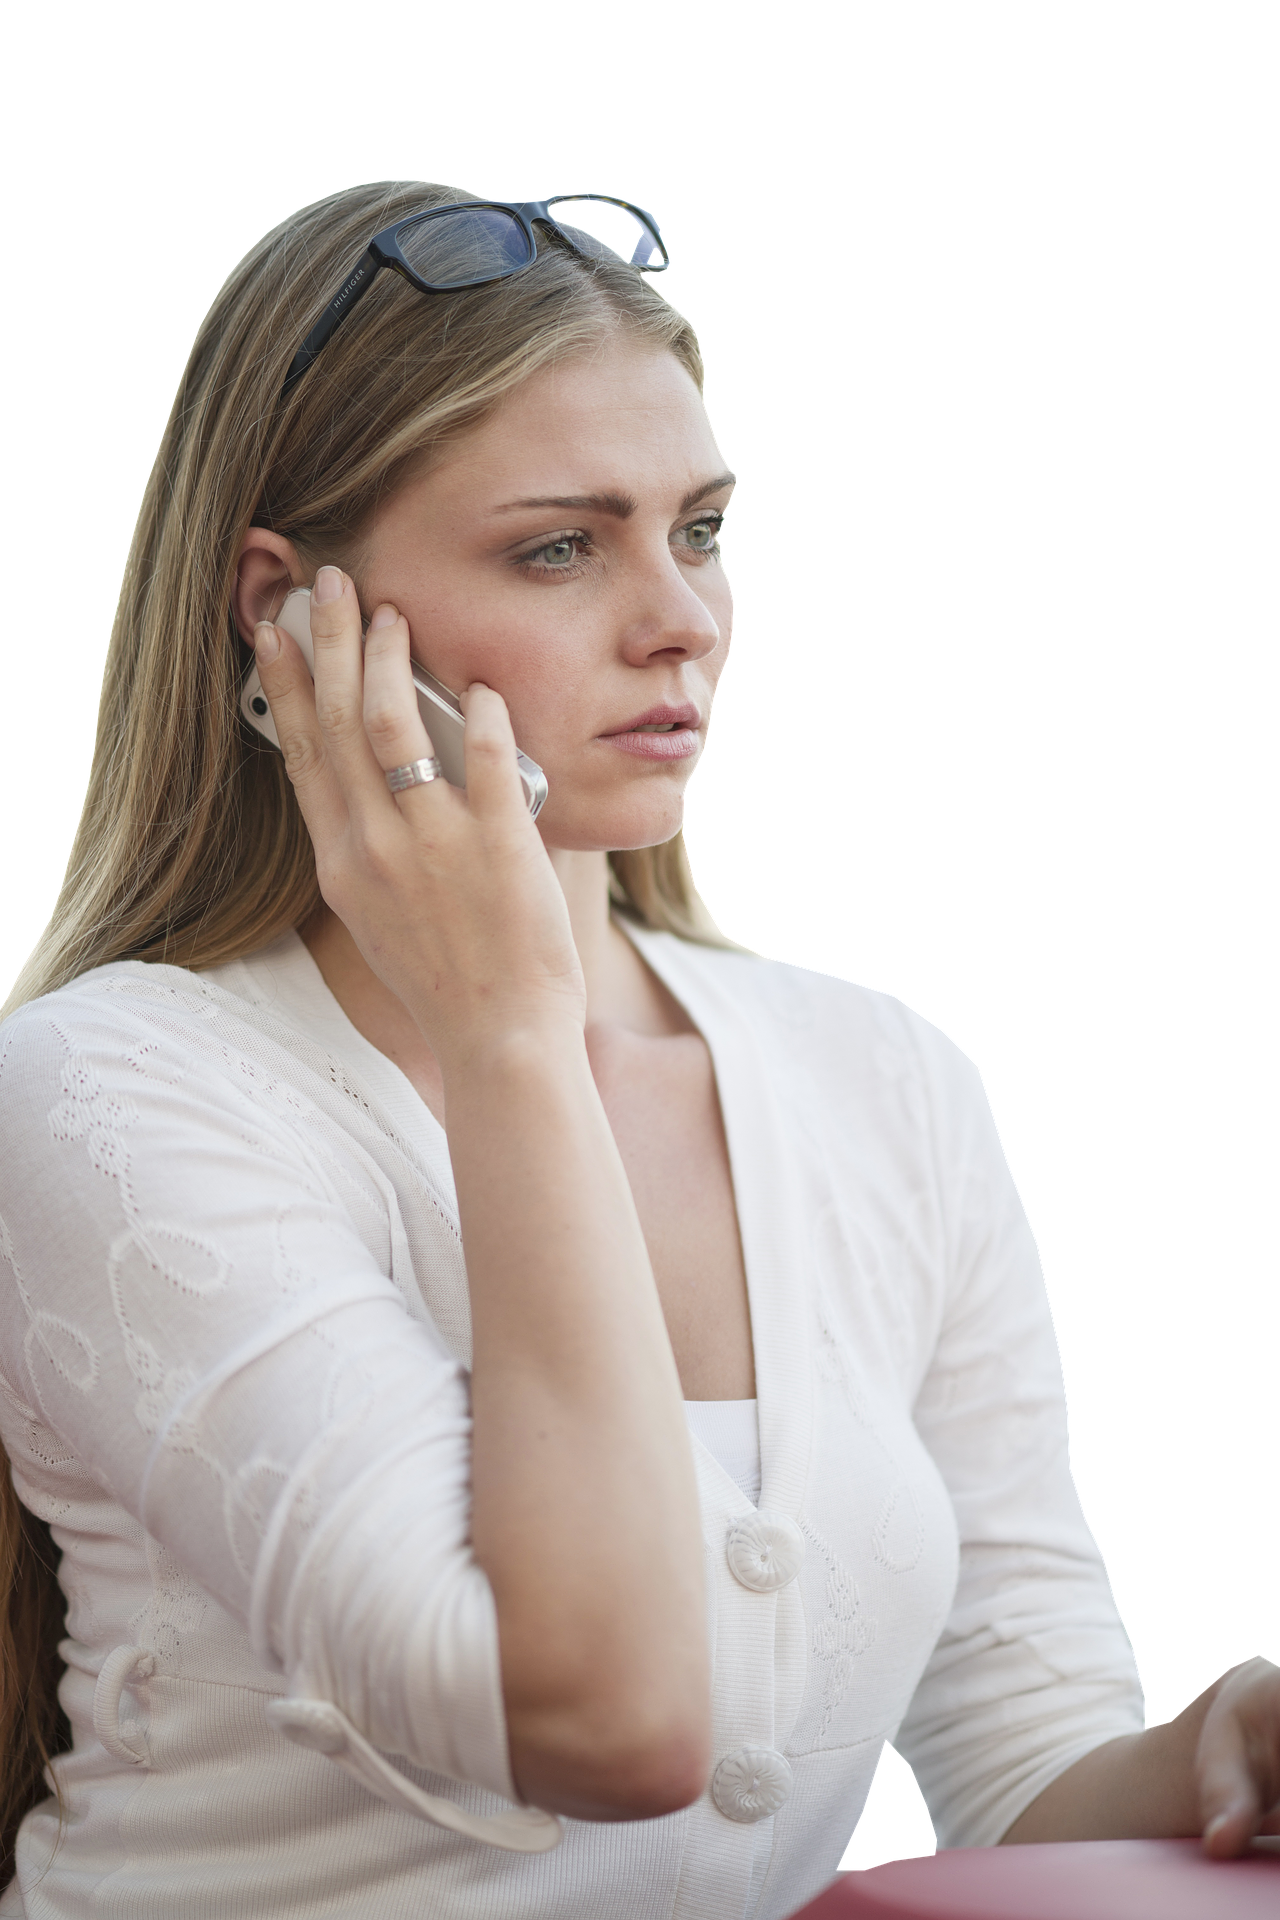 Women wearing white shirt with her eye glasses propped on her forehead and talking on a cell phone